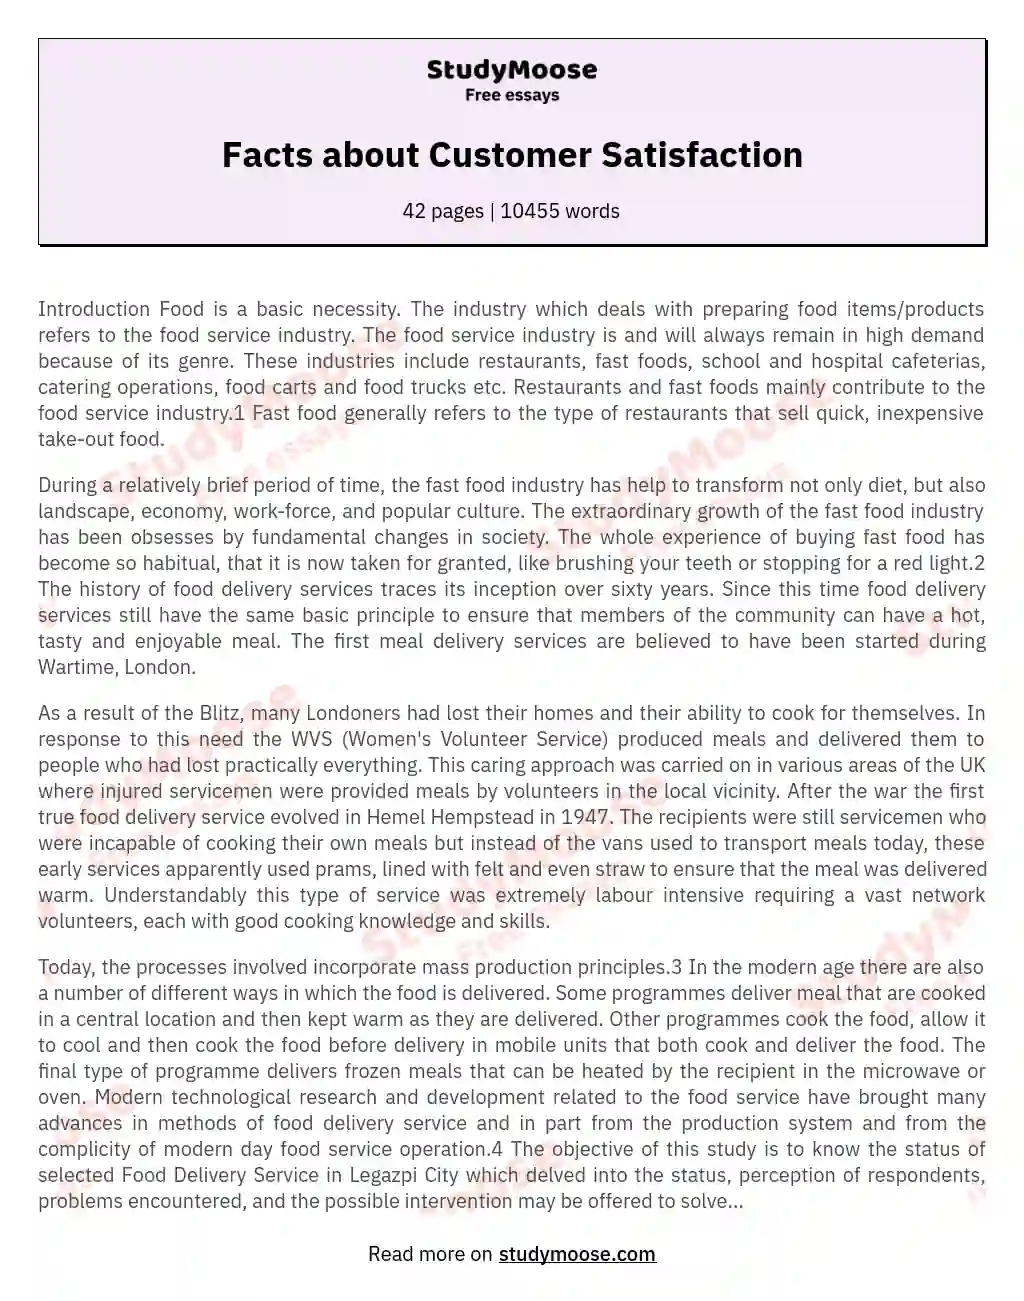 Facts about Customer Satisfaction